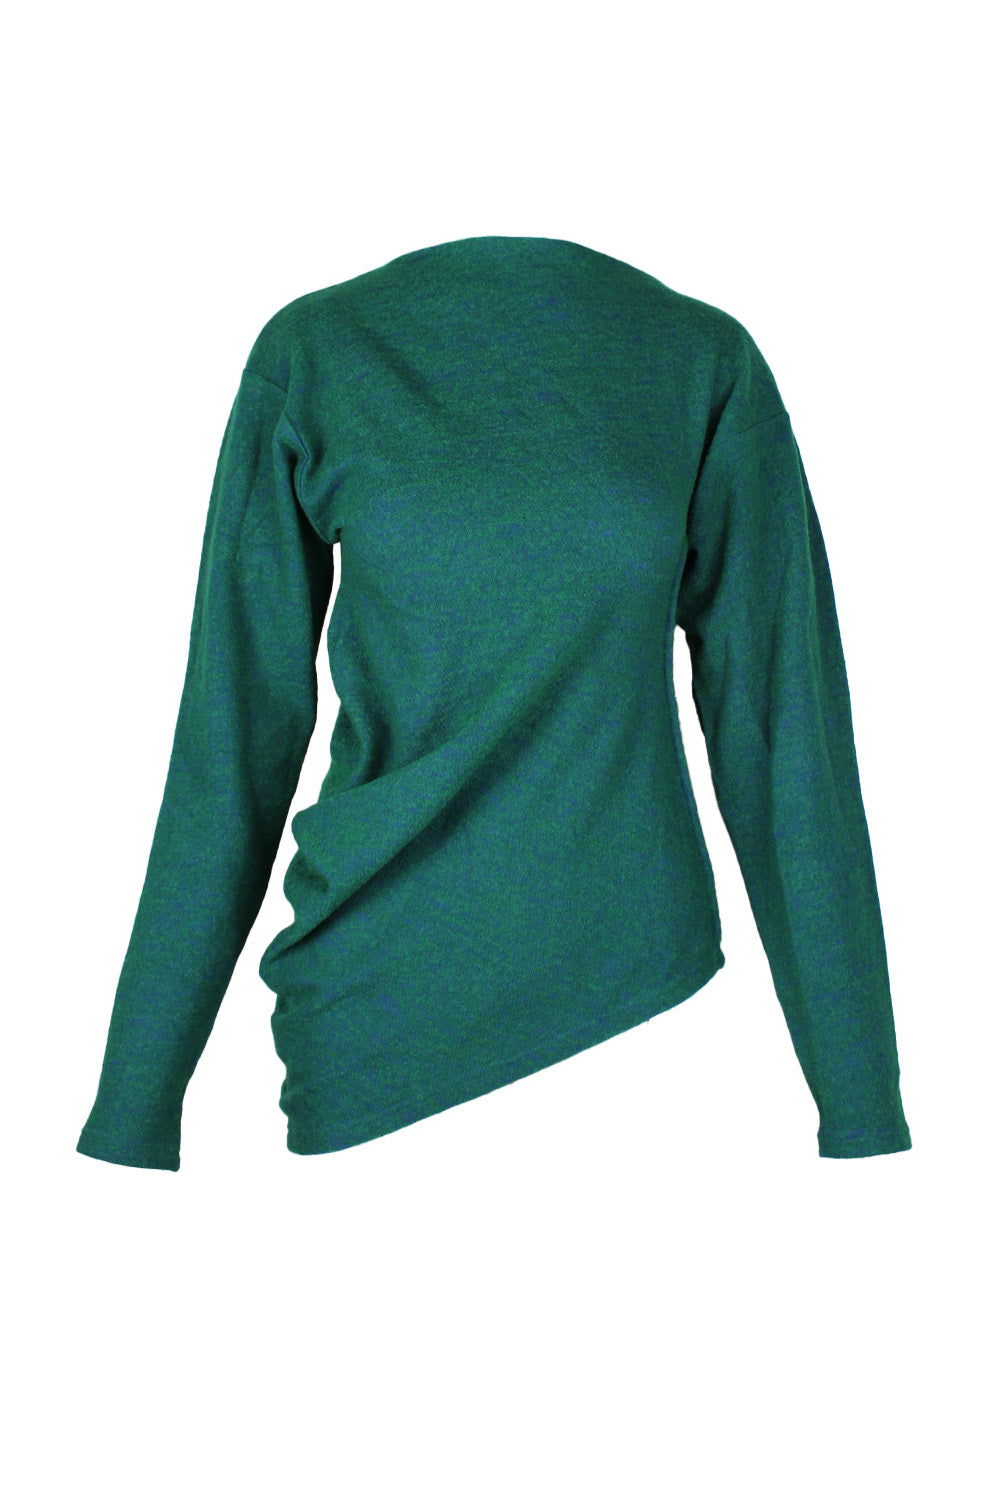 description: queenhot studio green long sleeve sweater. features assymetrical bottom hem, high neck, and drapped-like side. 